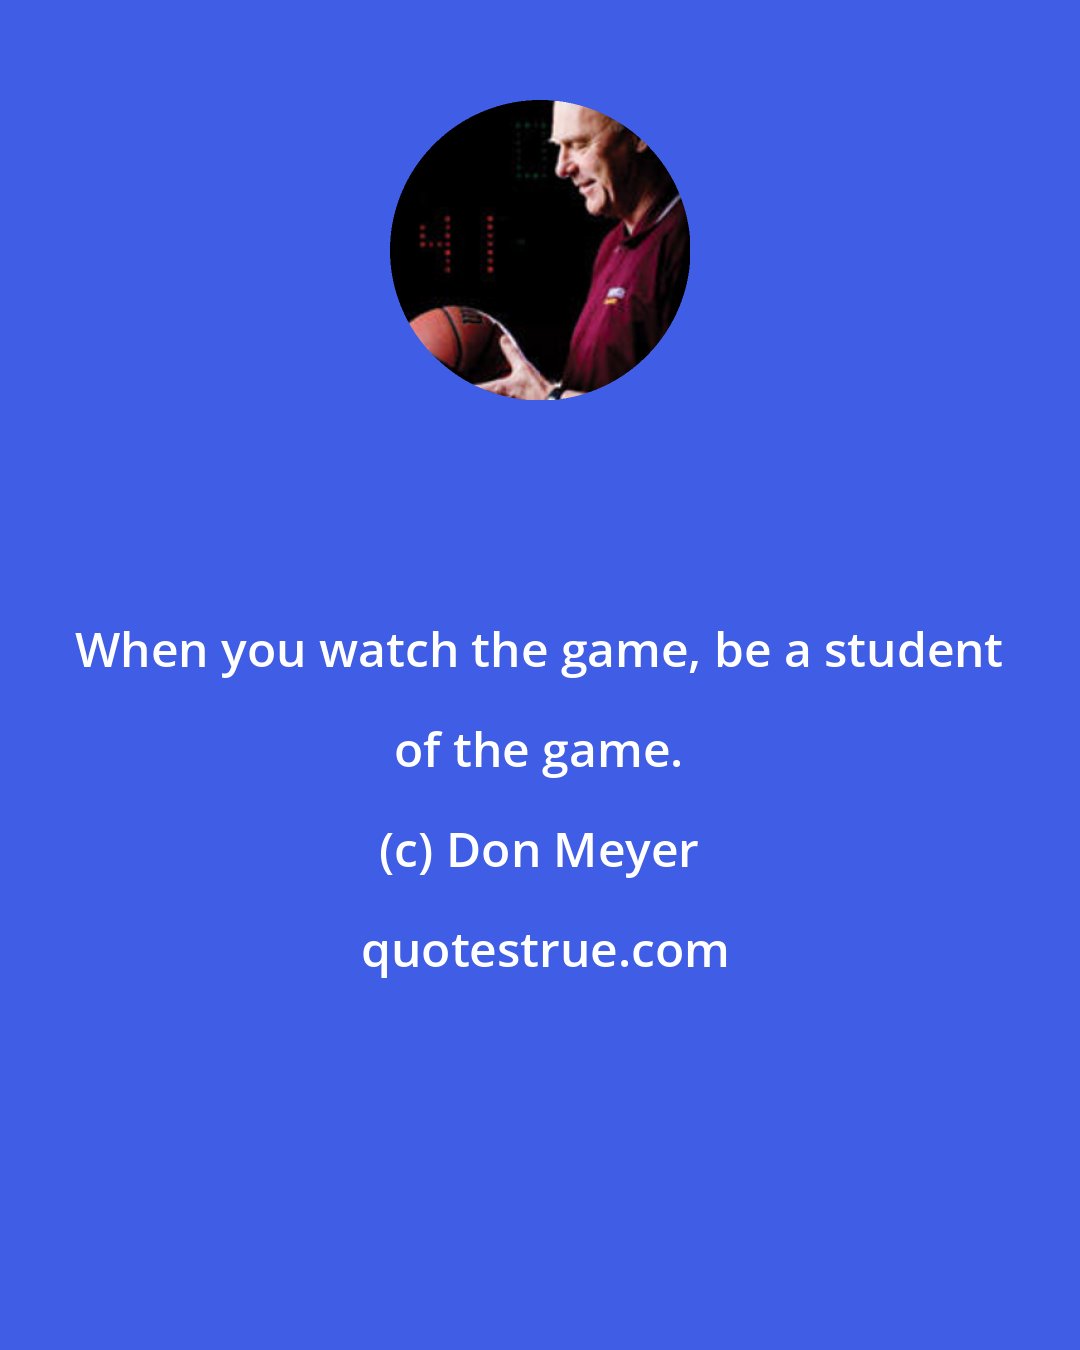 Don Meyer: When you watch the game, be a student of the game.